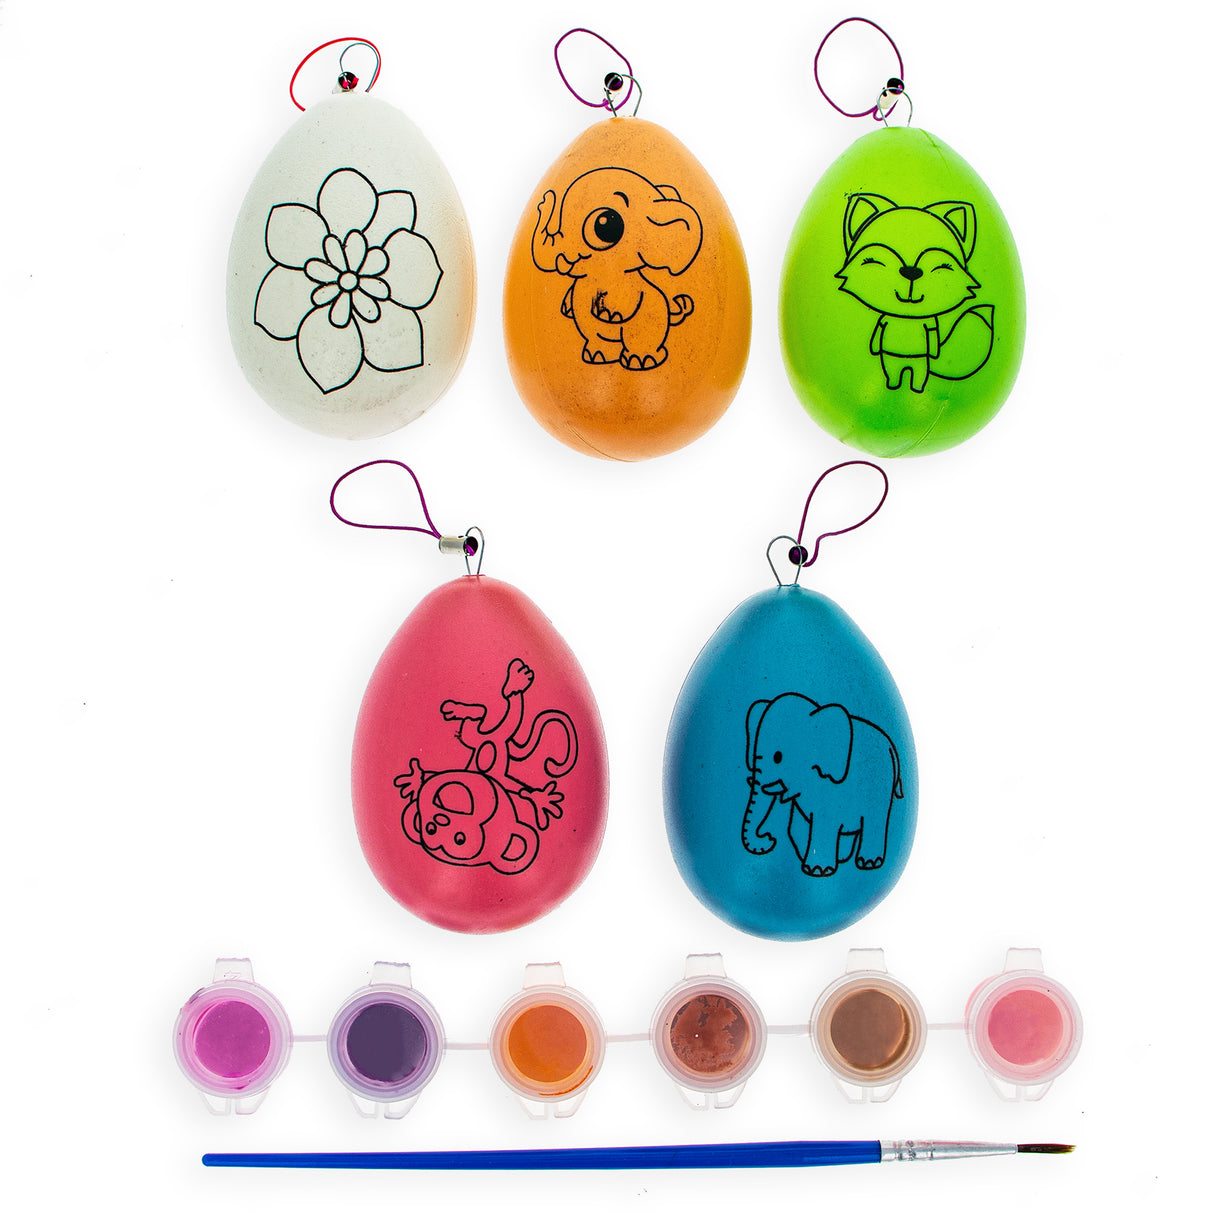 Colorful Easter Delights: Set of 5 Multicolored Solid Plastic Easter Egg Ornaments 4.75 Inches in Multi color, Oval shape